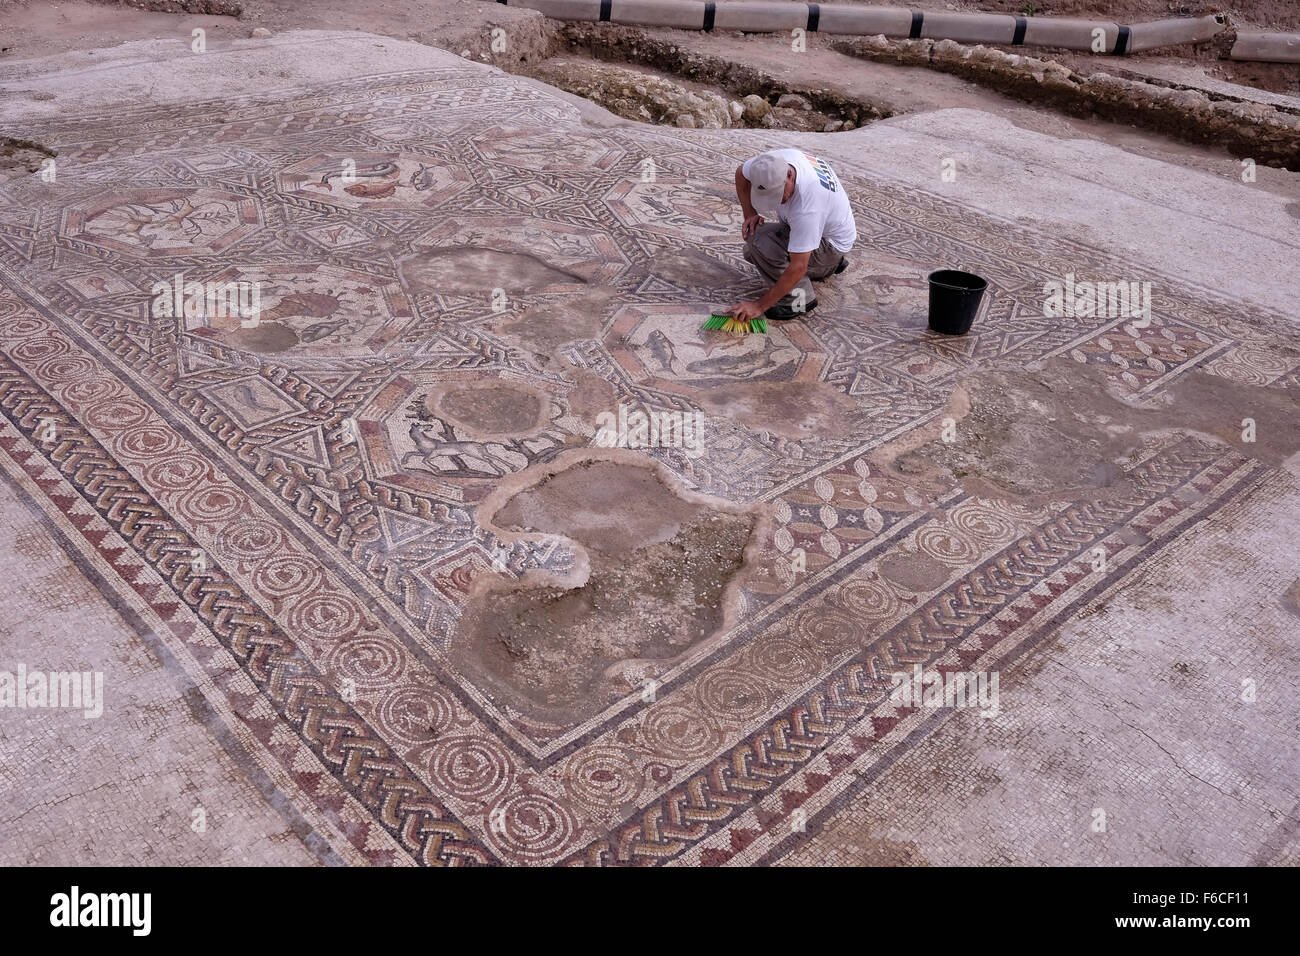 A worker of the Israel Antiquities Authority cleans a 1,700 year old mosaic, which served as pavement for the courtyard in a villa during the Roman and Byzantine periods in the Israeli central city of Lod Israel Stock Photo